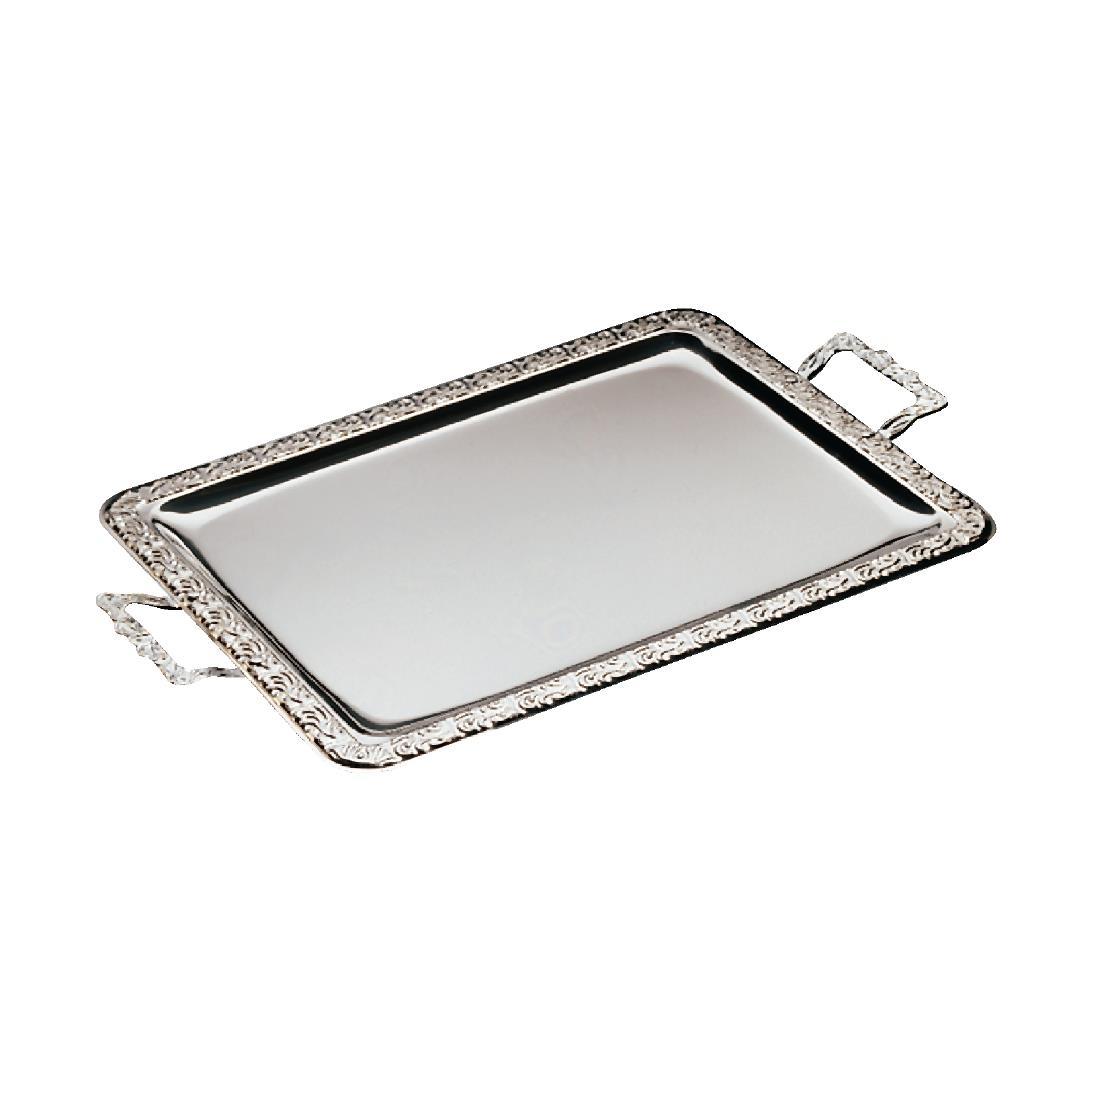 APS Stainless Steel Rectangular Handled Service Tray 600mm - P004  - 1